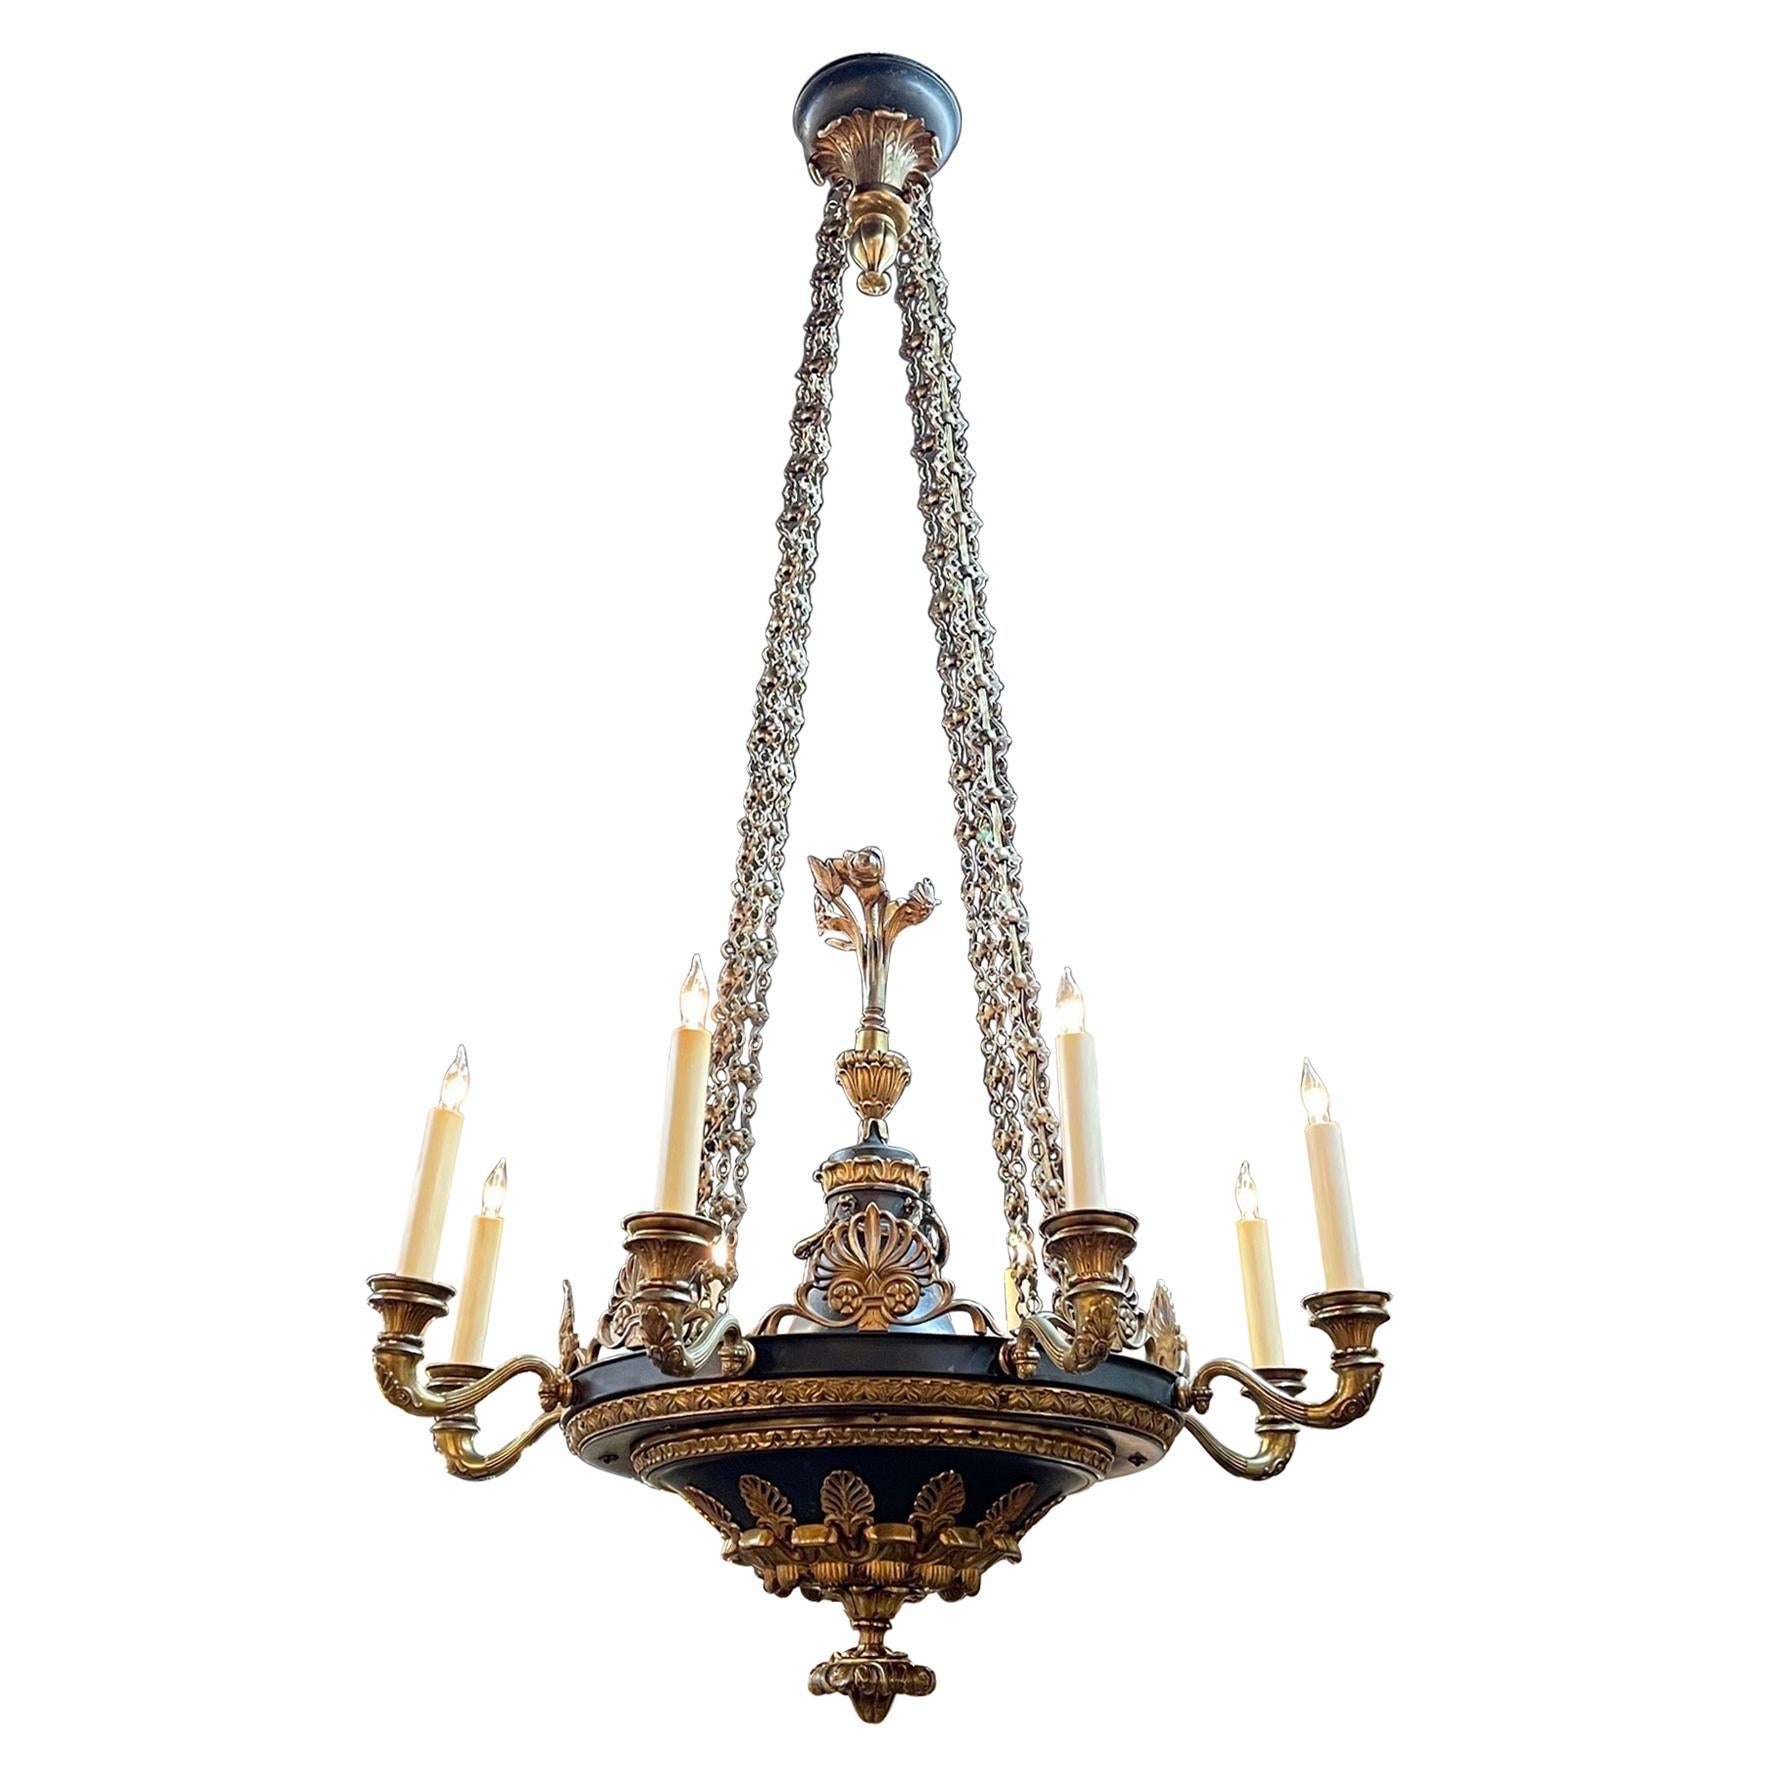 19th Century French Empire Gilt Bronze and Tole Chandelier with 8 Lights